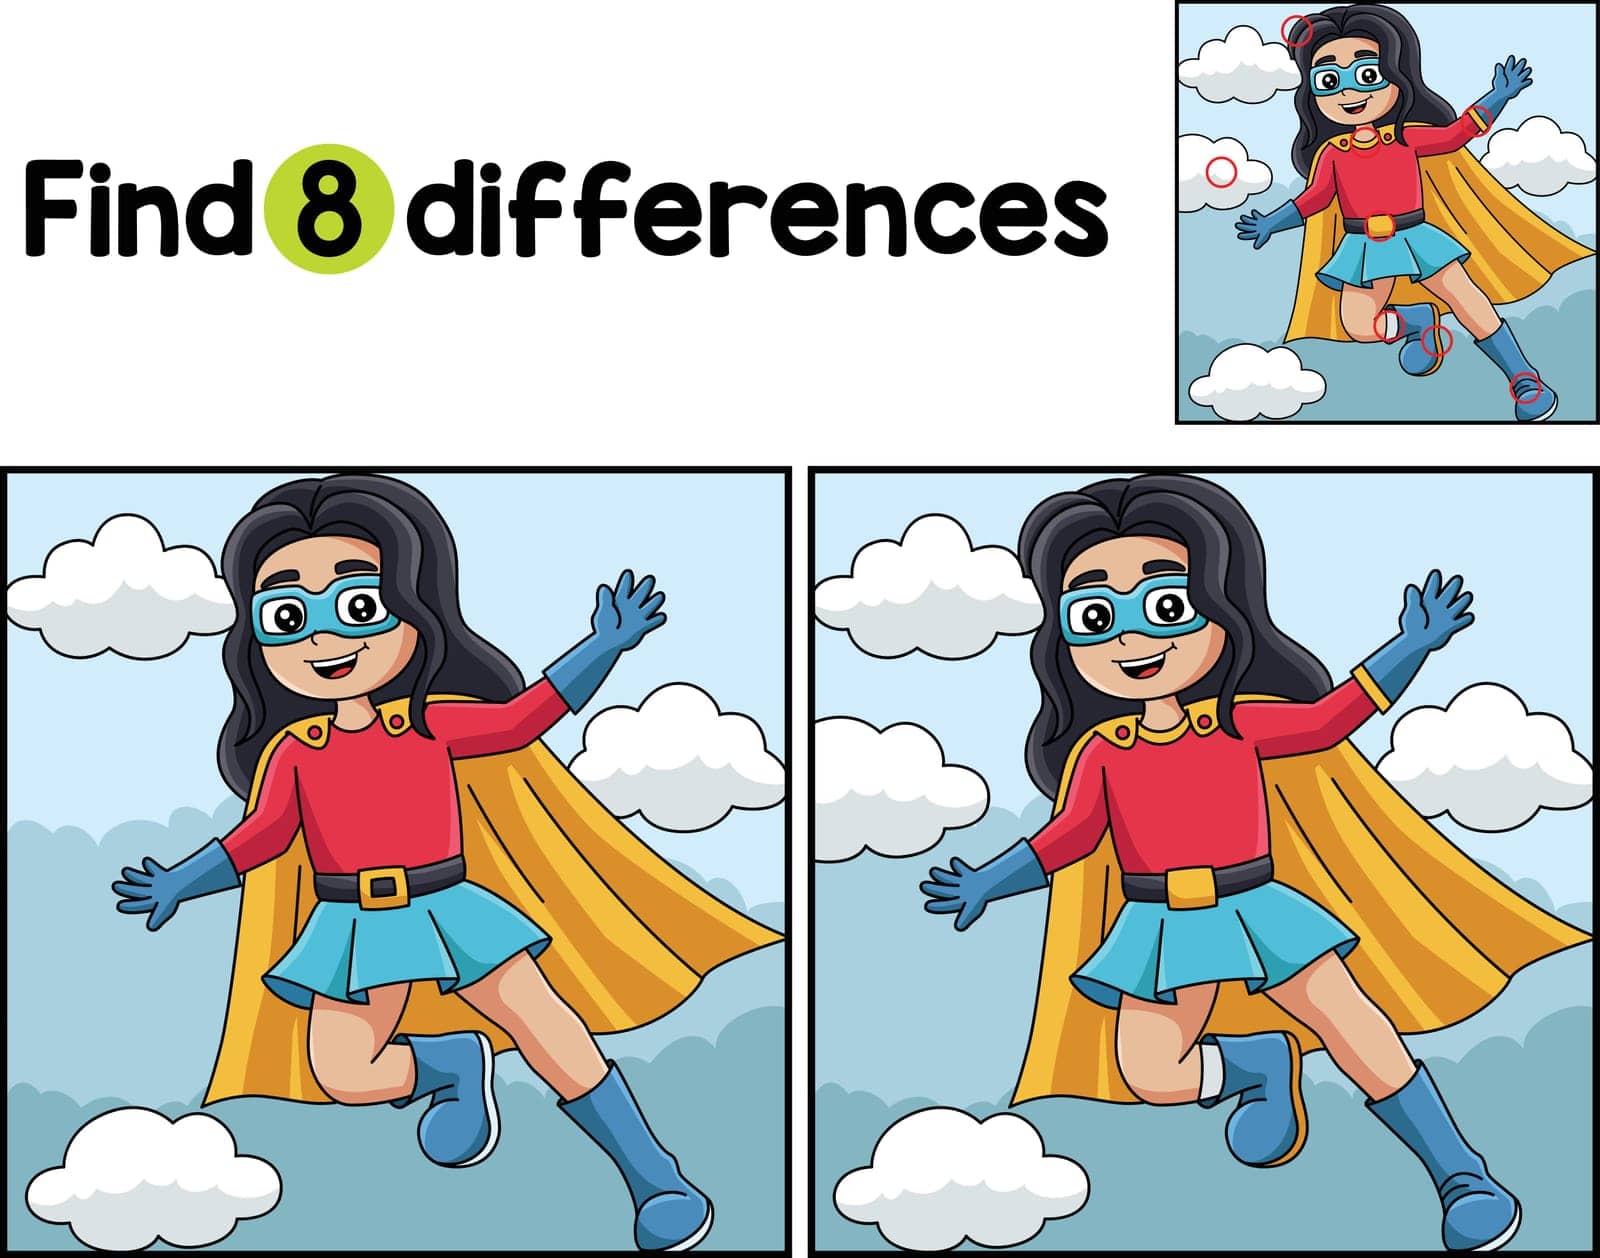 Find or spot the differences on this Superhero Girl Kids activity page. It is a funny and educational puzzle-matching game for children.